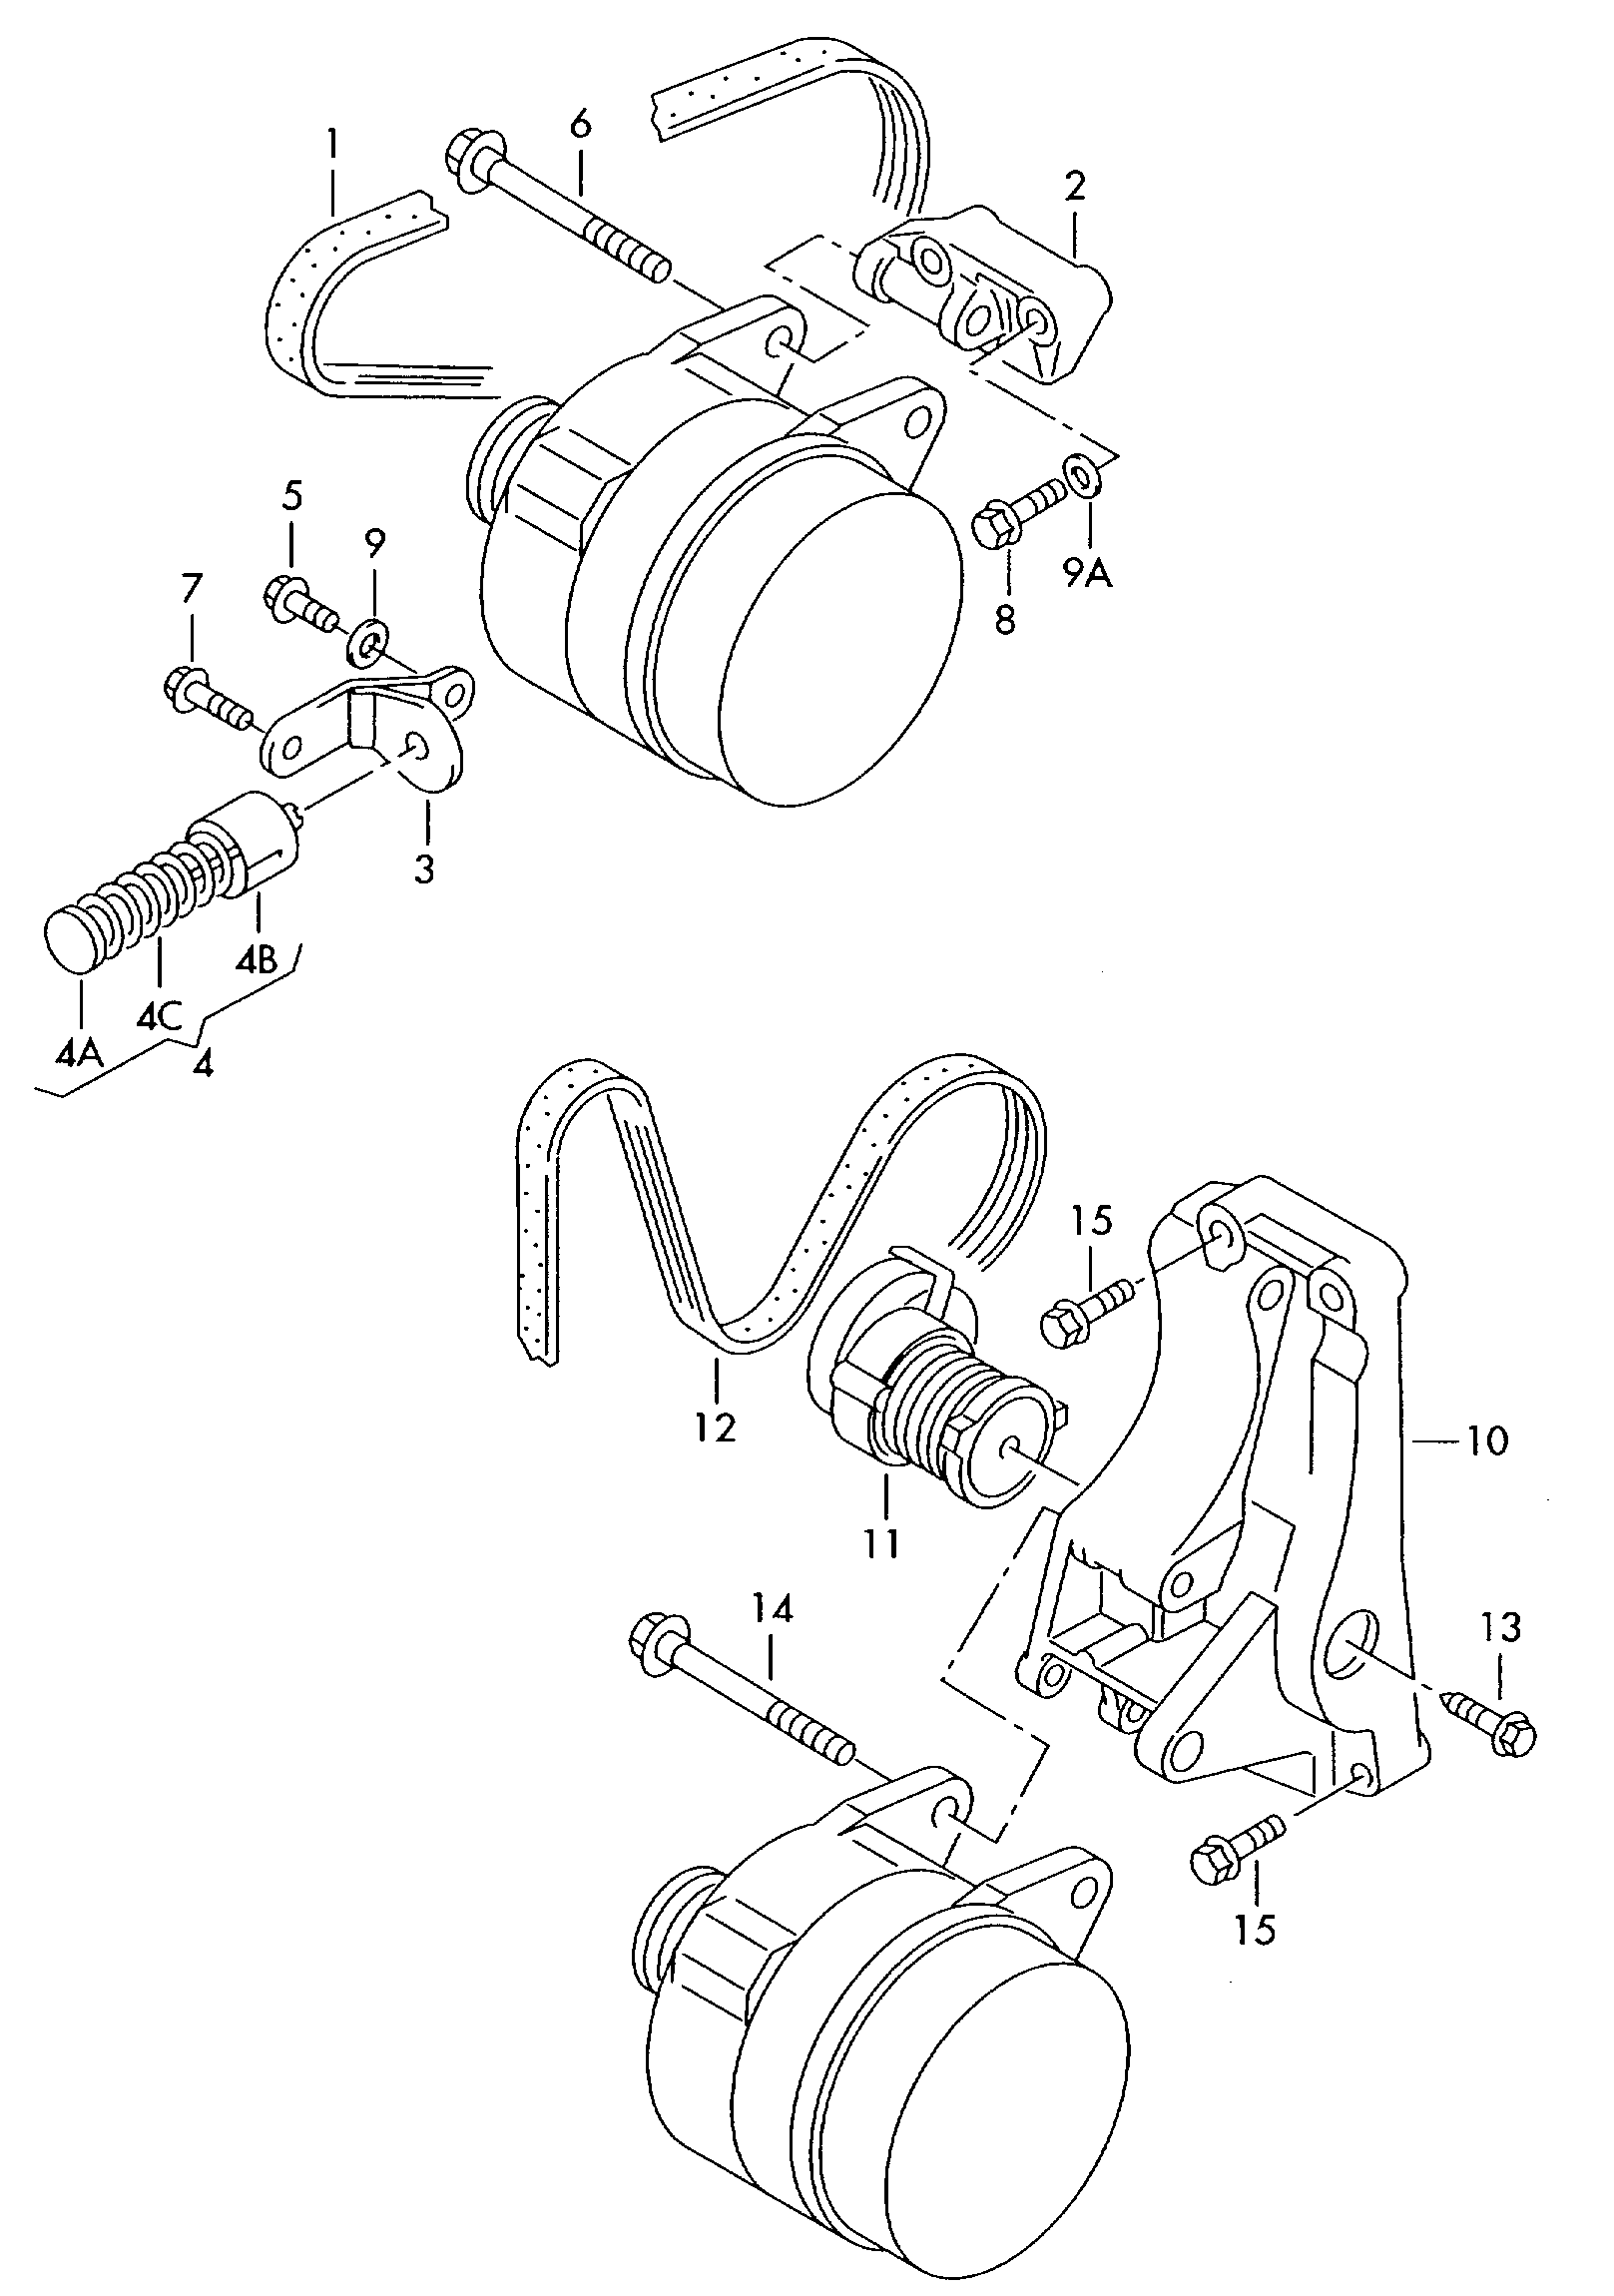 connecting and mounting parts<br>for alternatorPoly-V-belt 1.4ltr. - Beetle Cabrio - bec